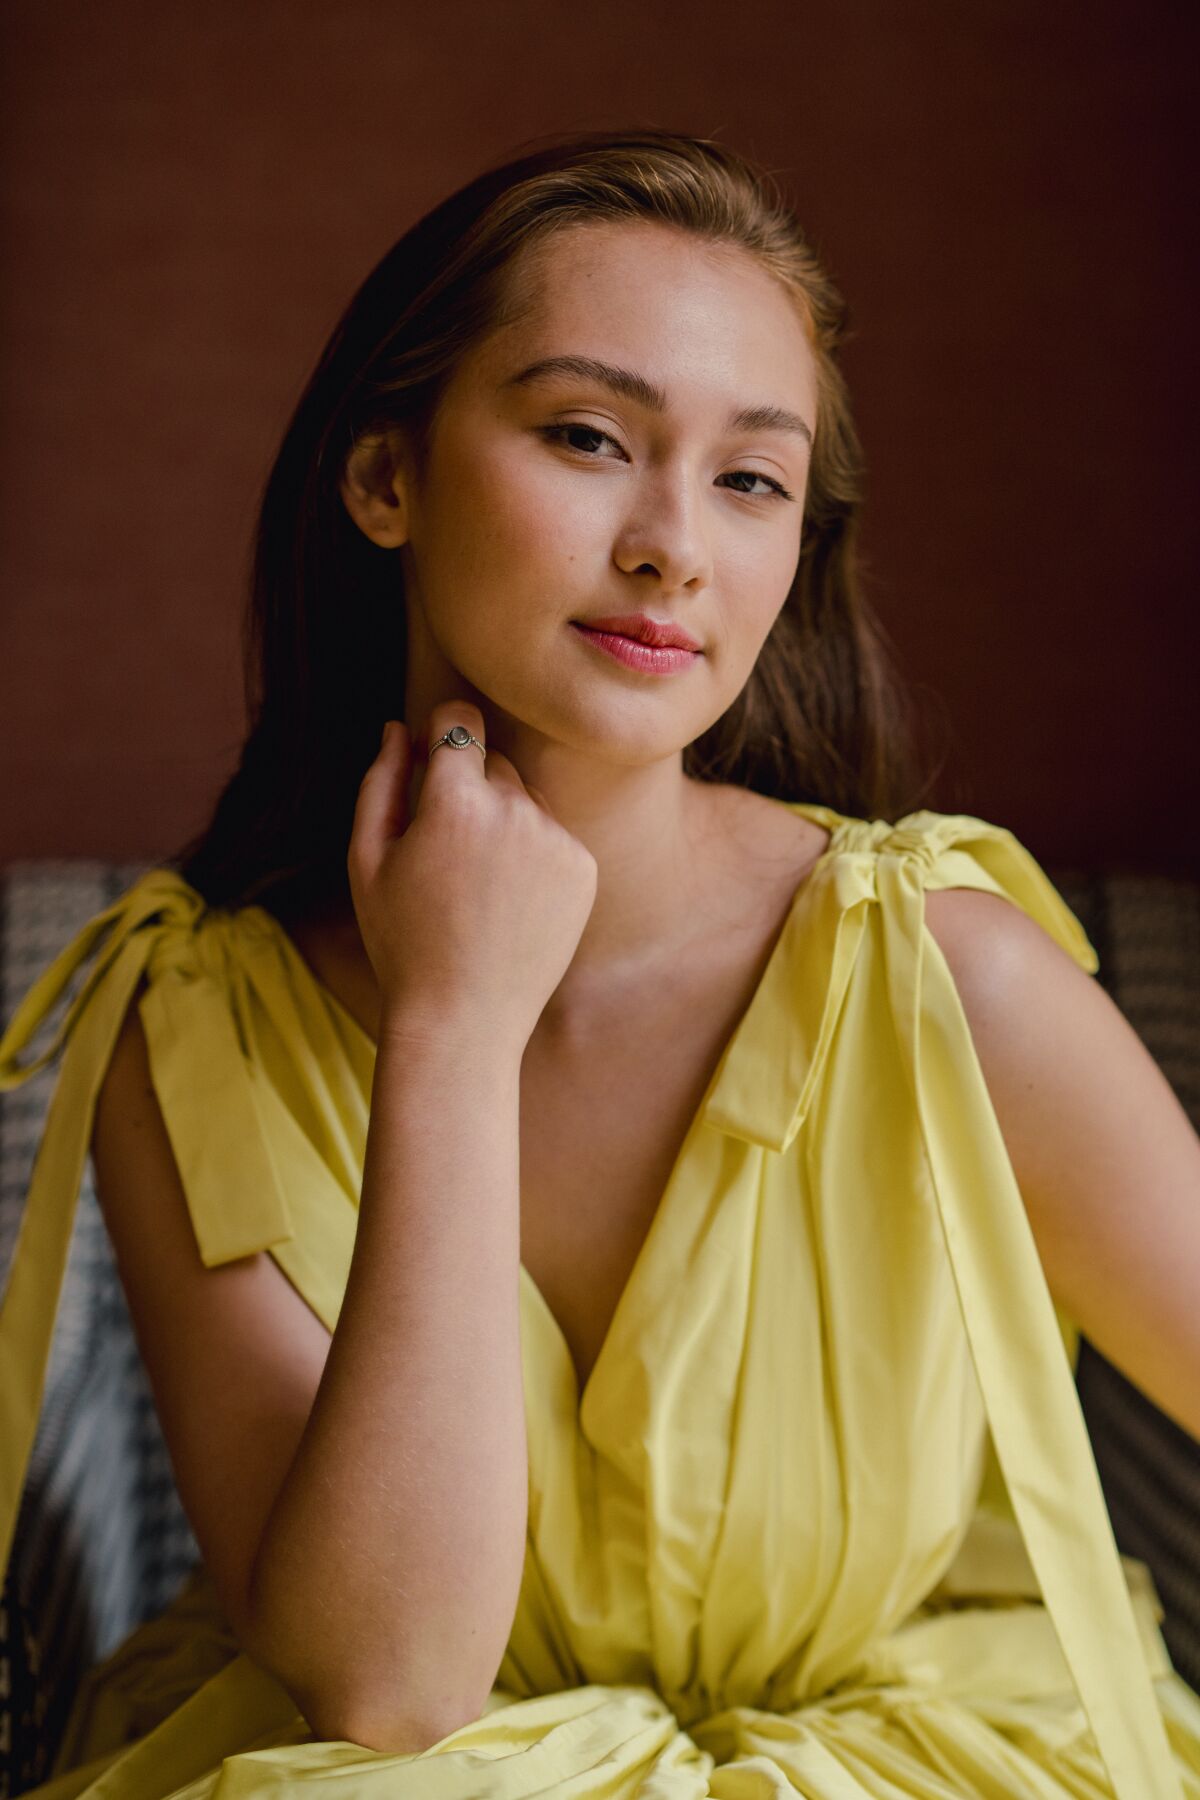  Lola Tung in a yellow dress with her hand near her neck.